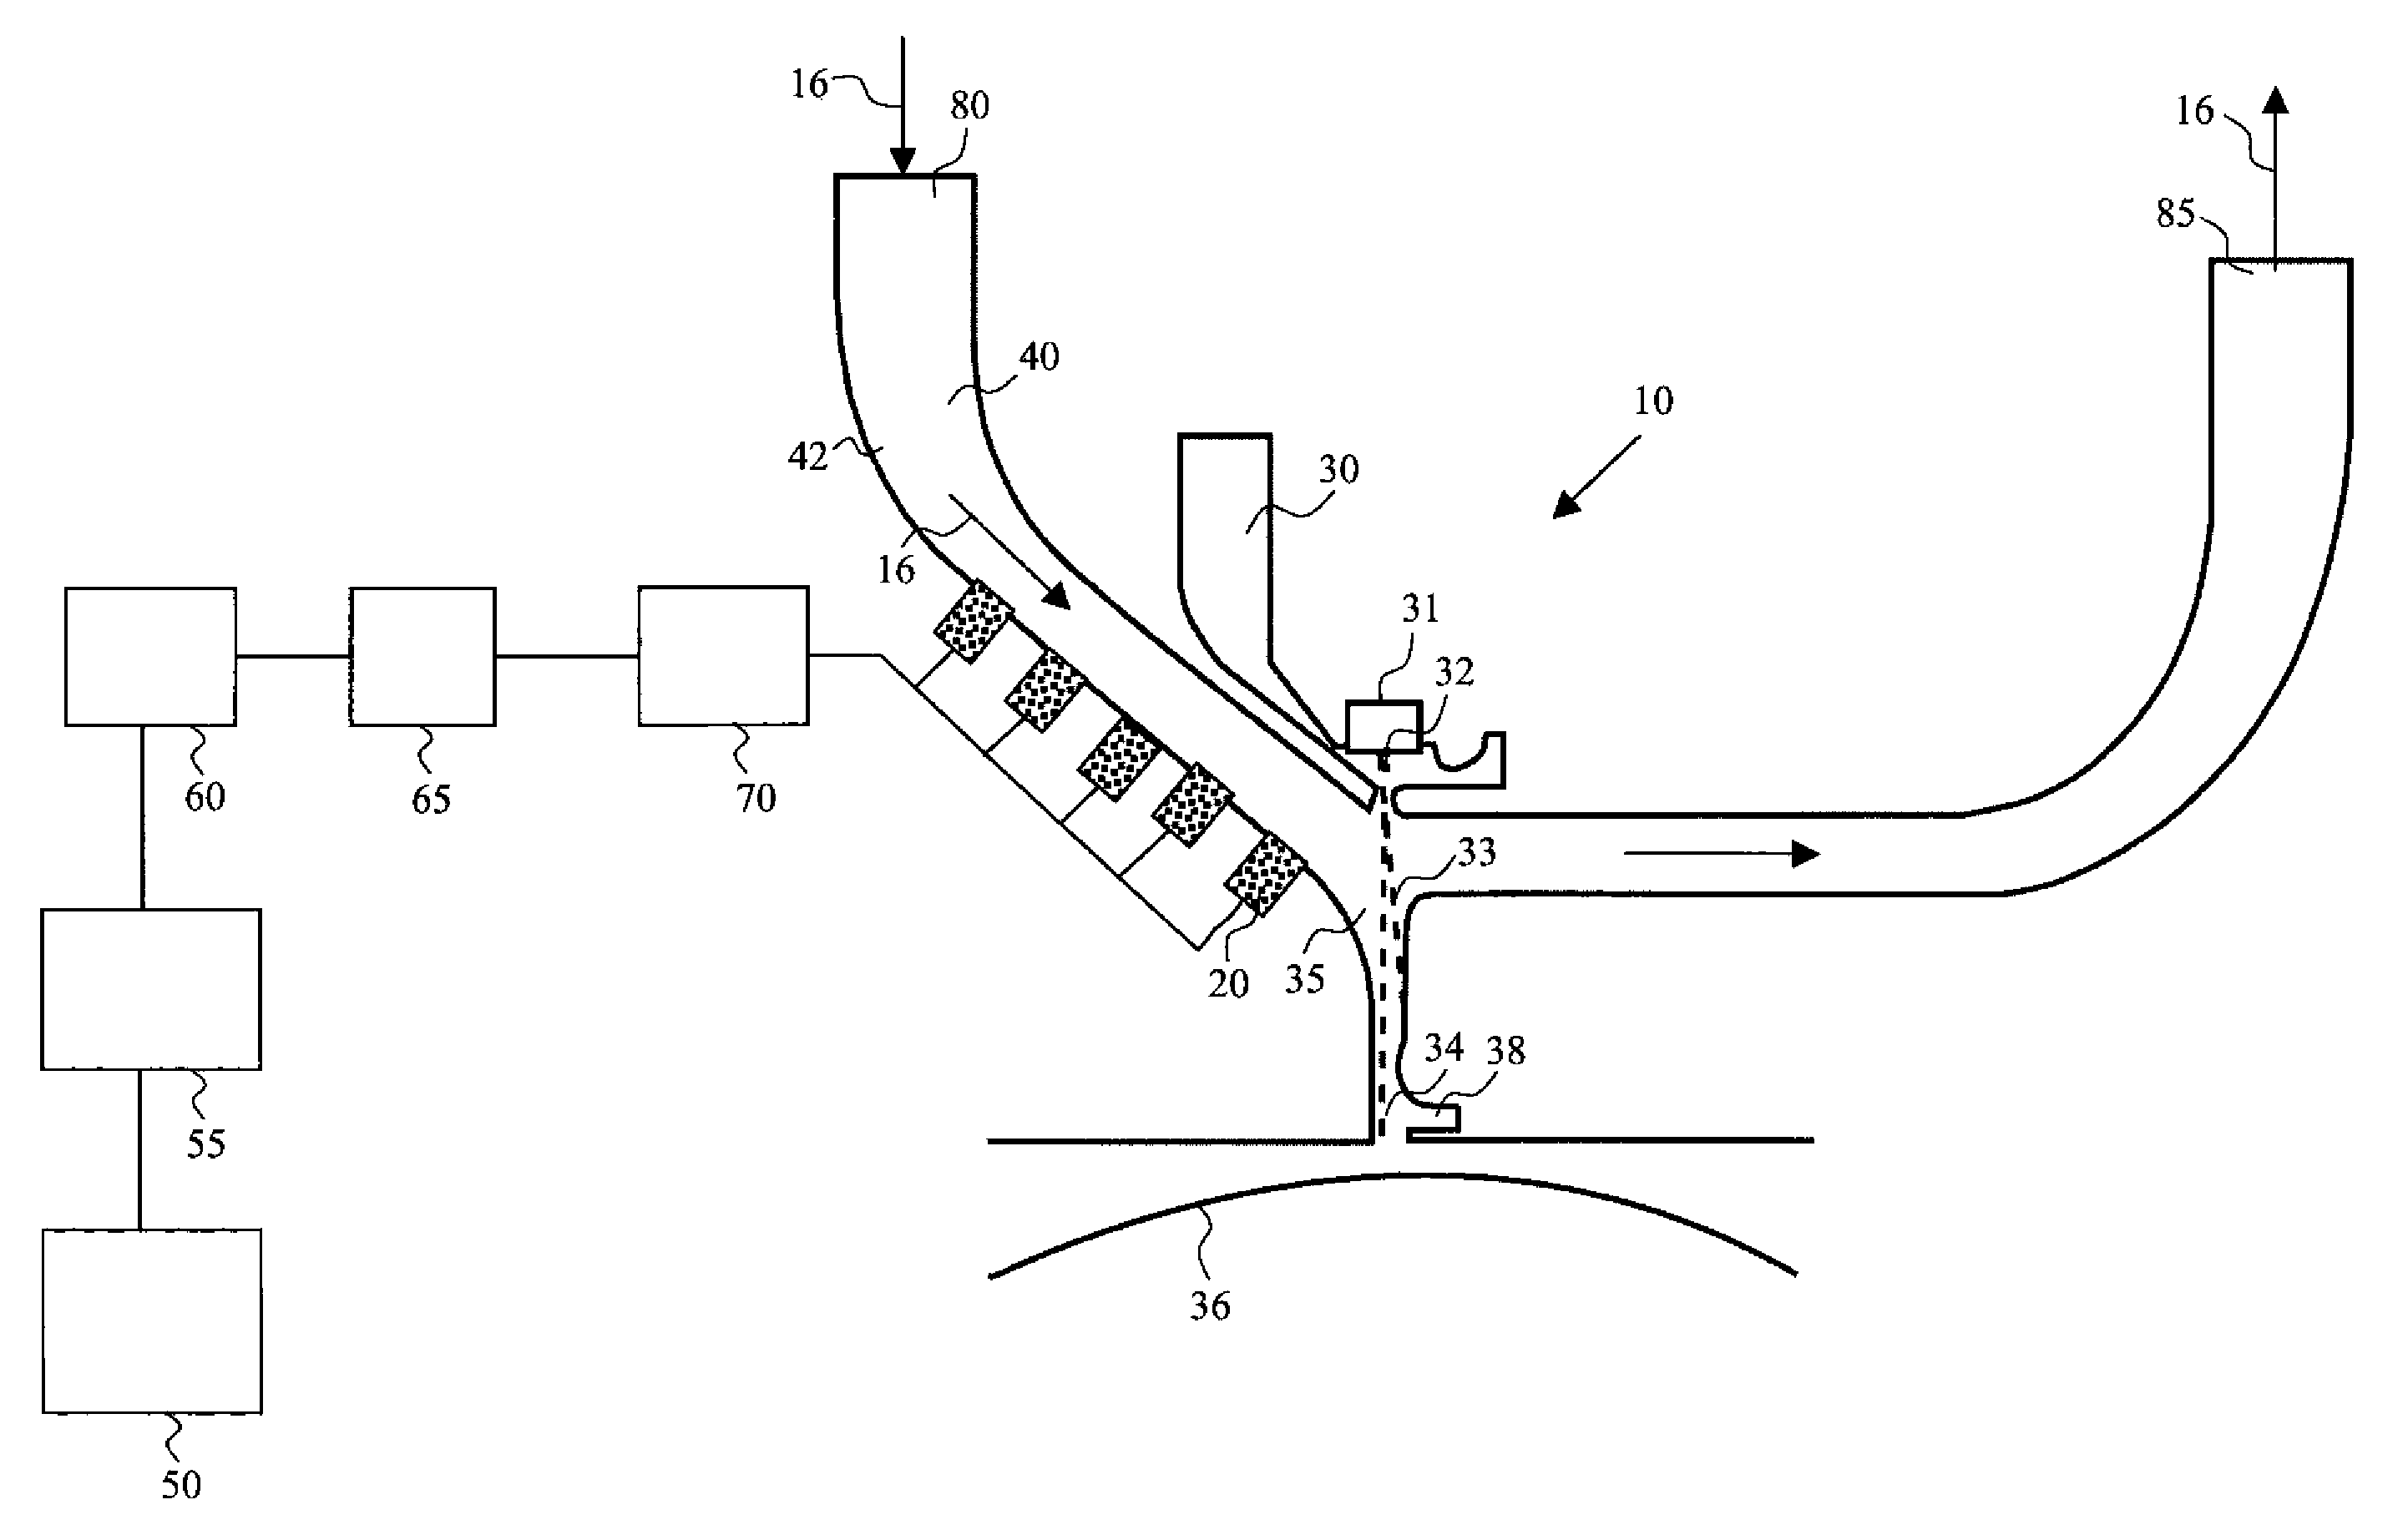 Acoustic fluid flow device for printing system